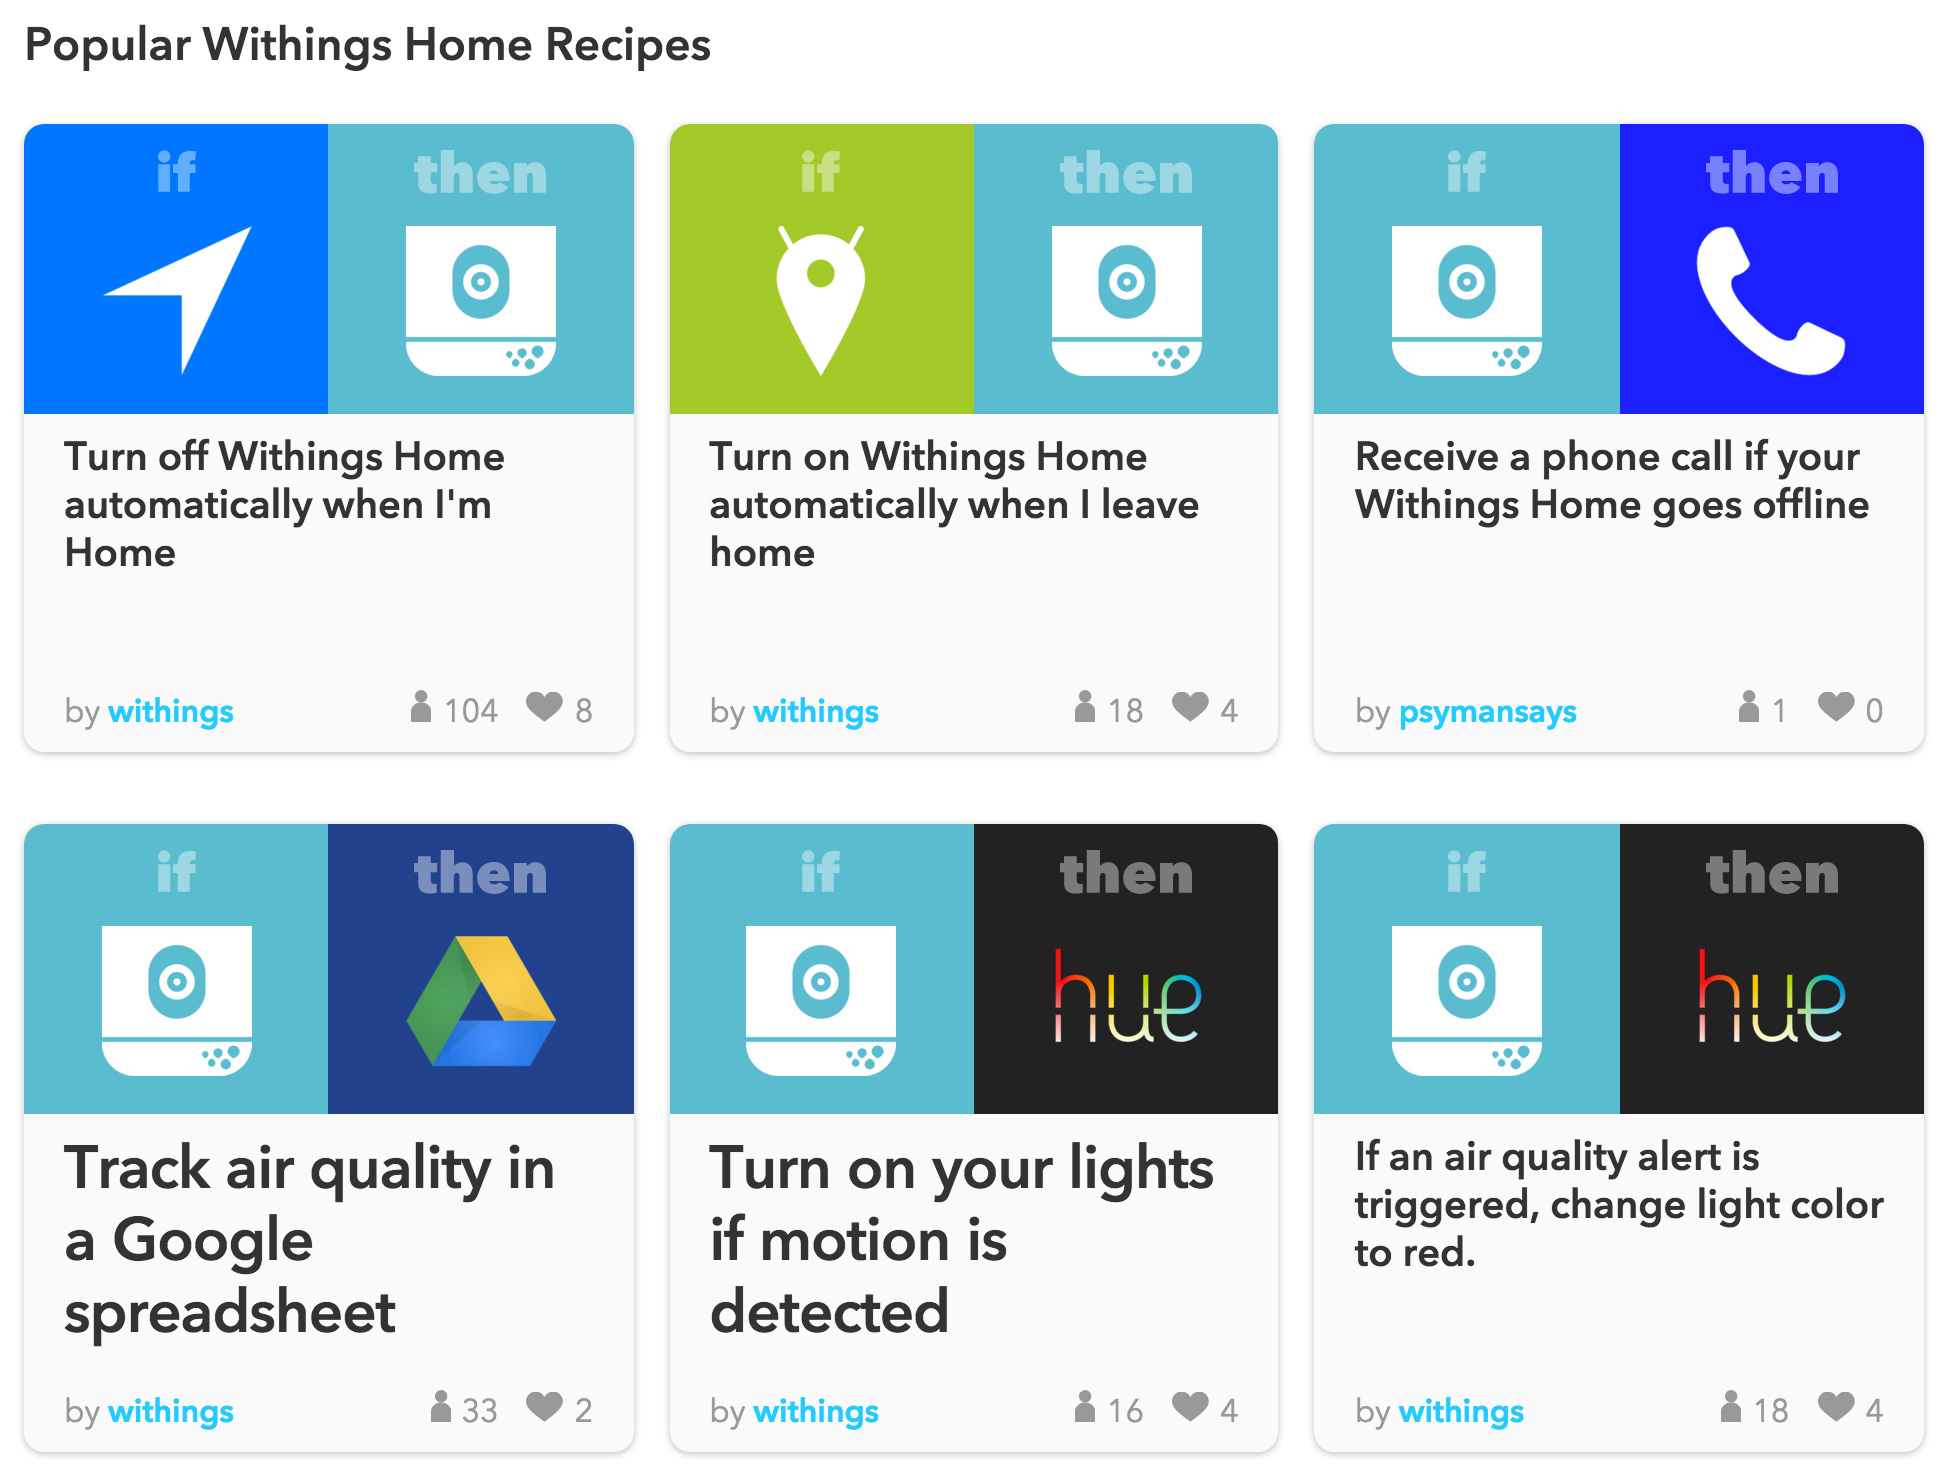 La Withings Home sur IFTTT